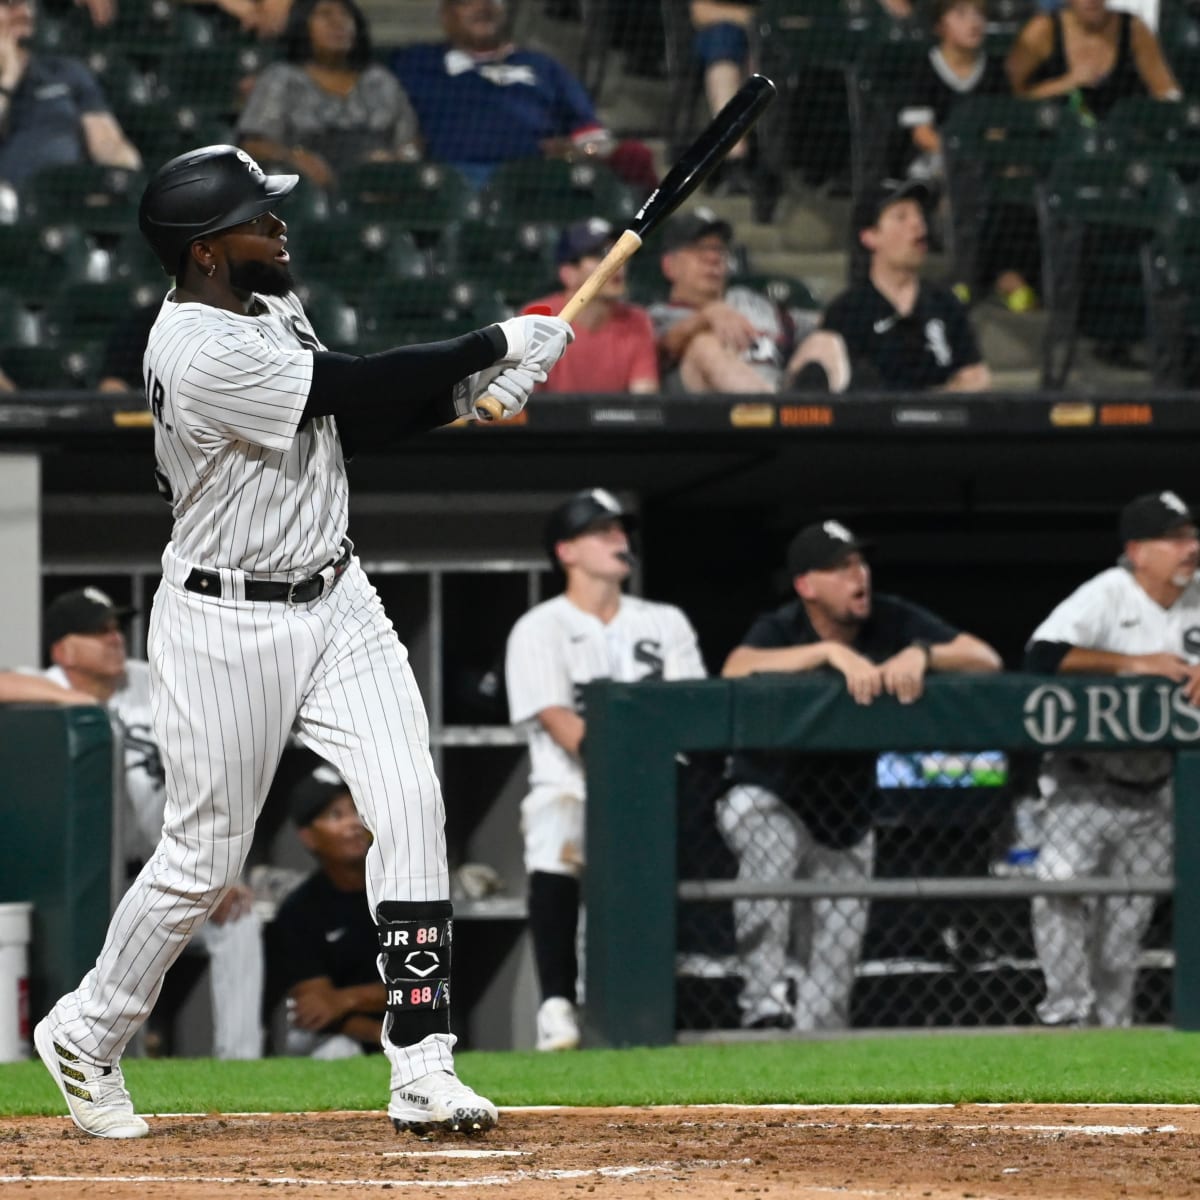 Luis Robert Jr. robs and hits homer in White Sox loss to A's